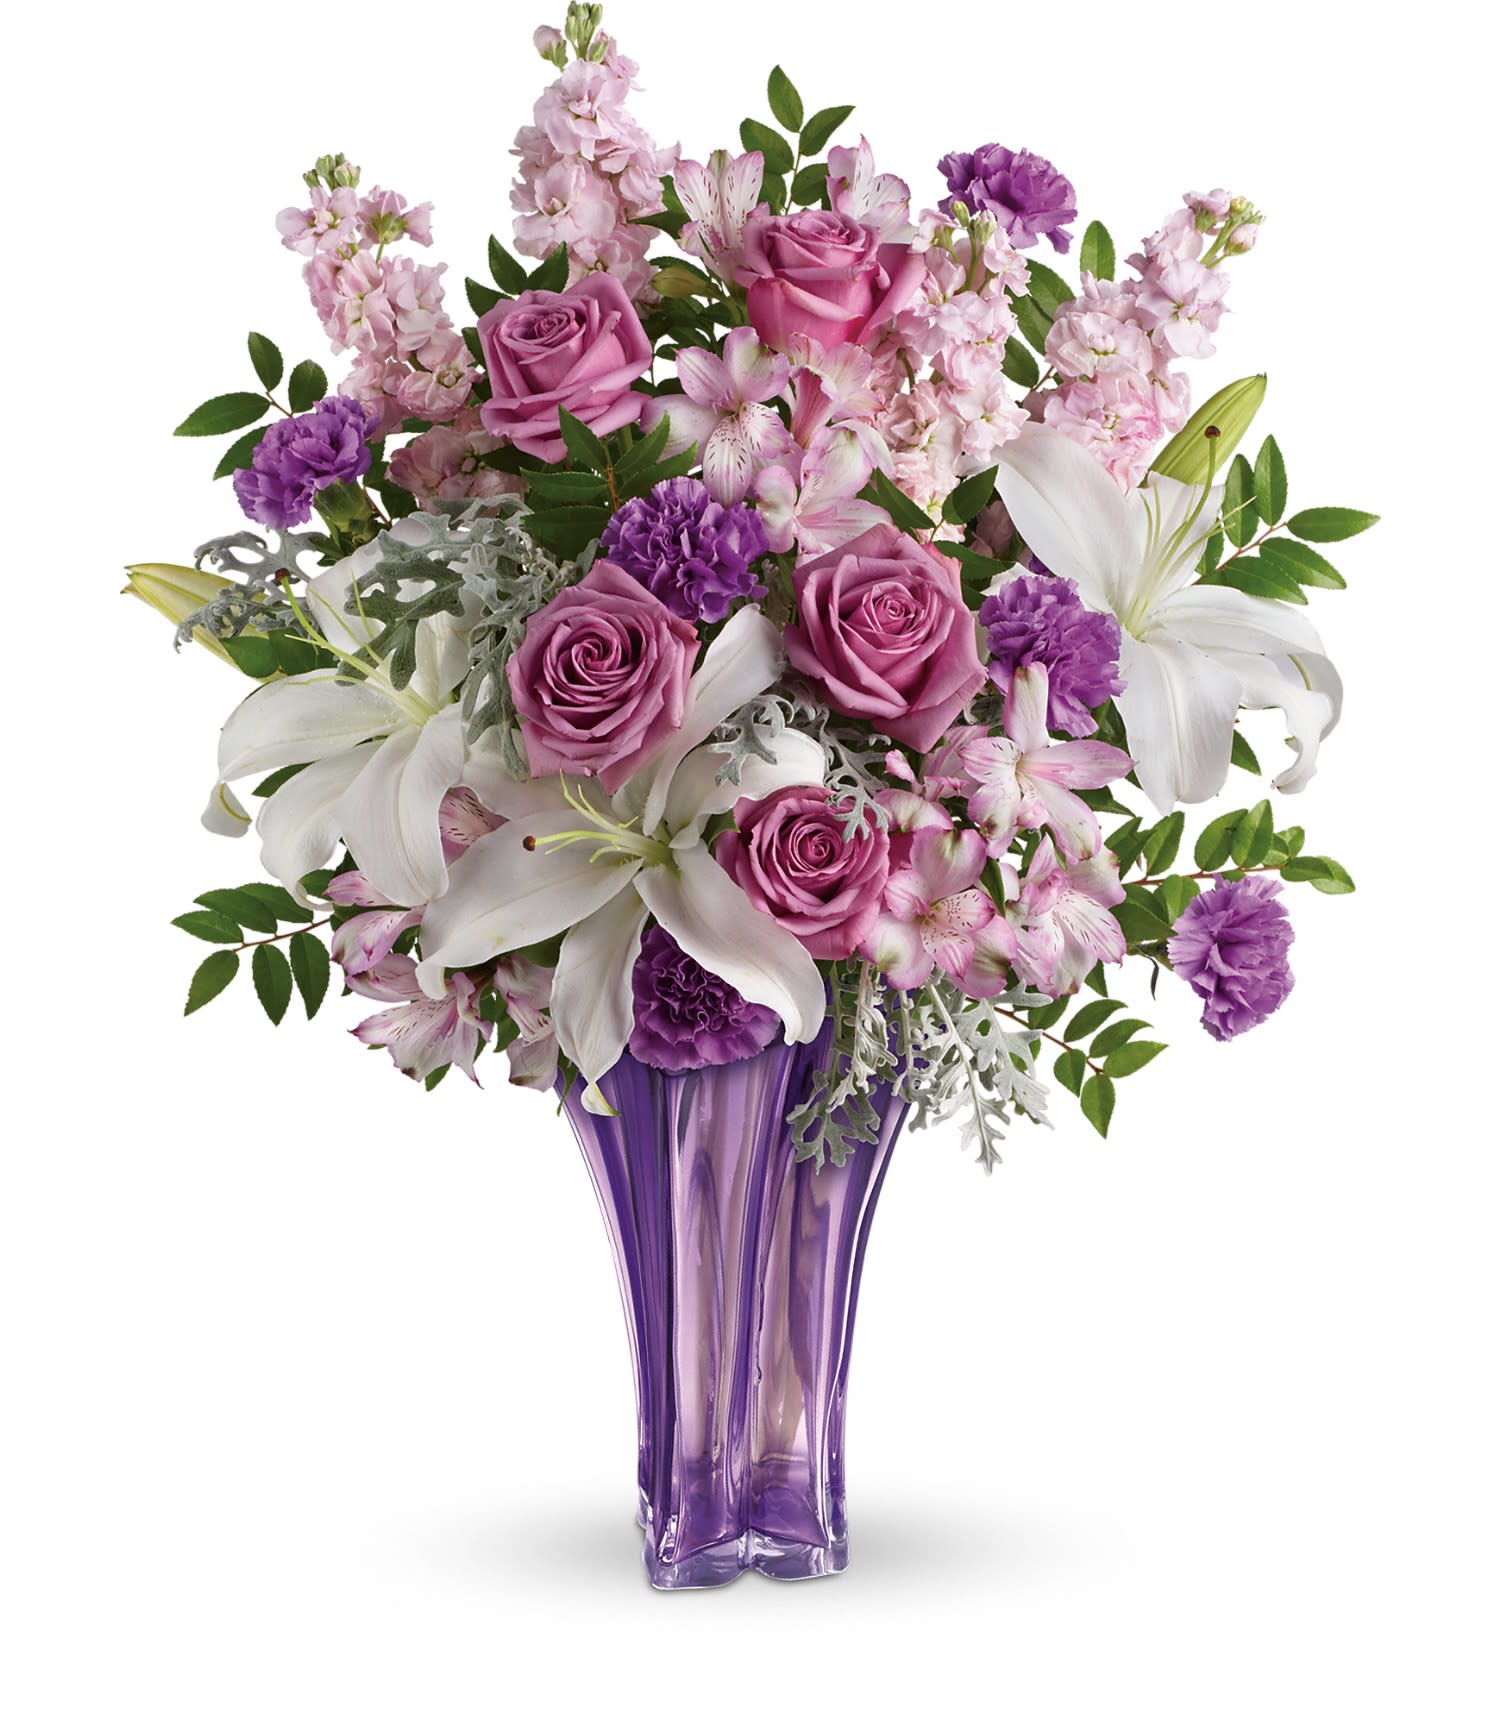 Lavished in Lilies Bouquet - Luxe lavender roses, white oriental lilies, light pink alstroemeria, lavender carnations and light pink stock are artistically arranged with huckleberry and dusty miller. Delivered in a Luxurious Lavender vase. Approximately 21 W x 25 1/2 H  T601-5A